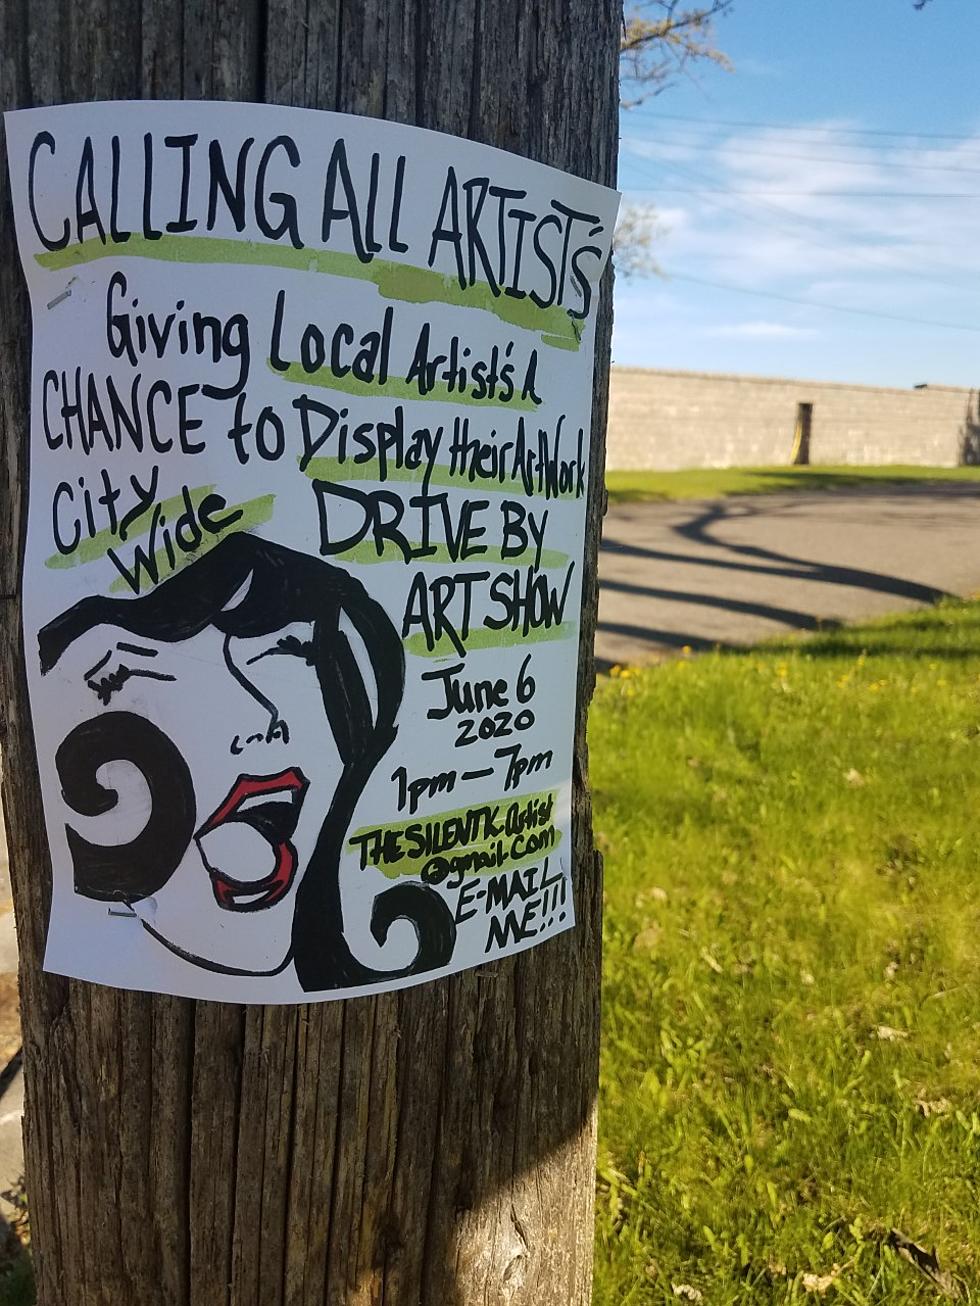 “Drive By Art Show” Coming to Yards, Driveways Throughout St. Cloud